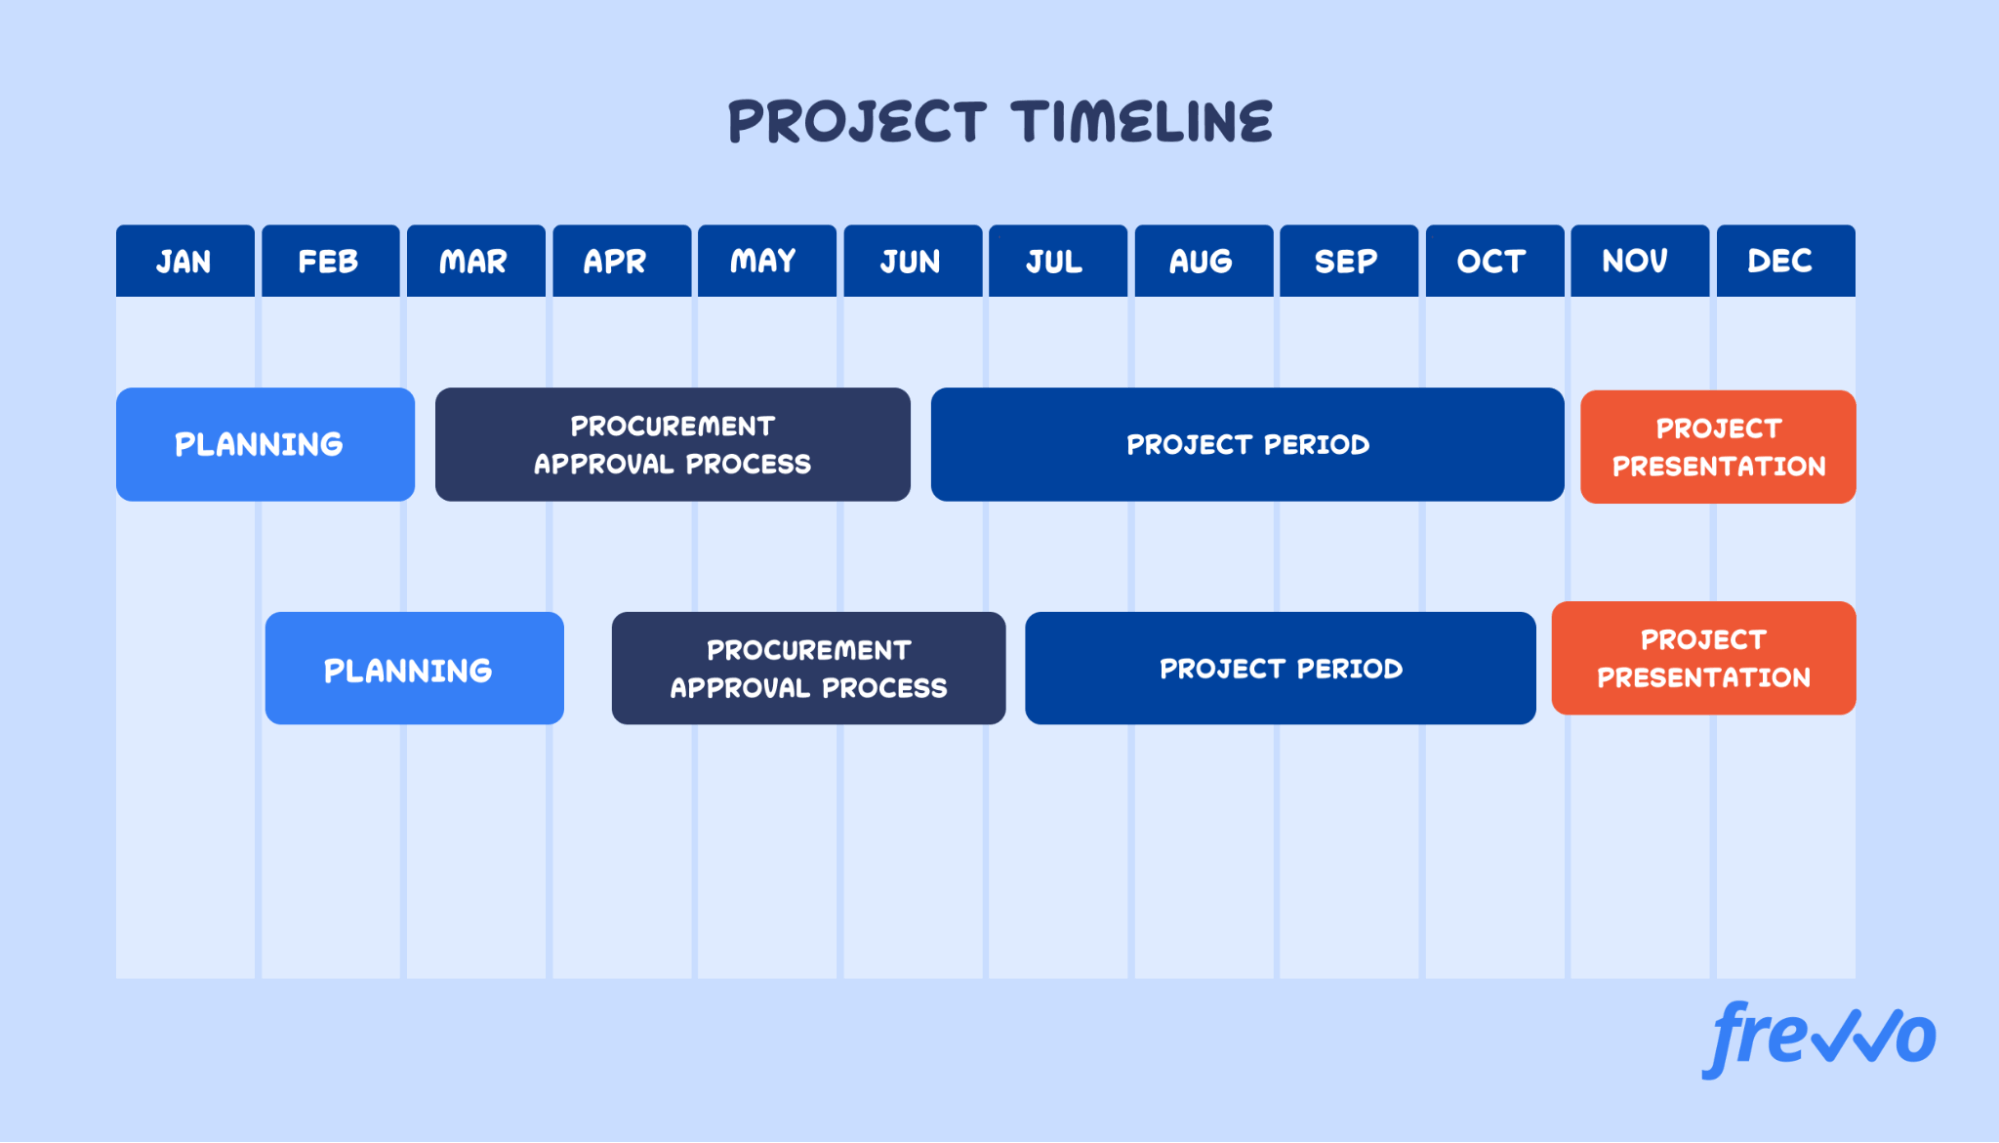 Example of a project timeline